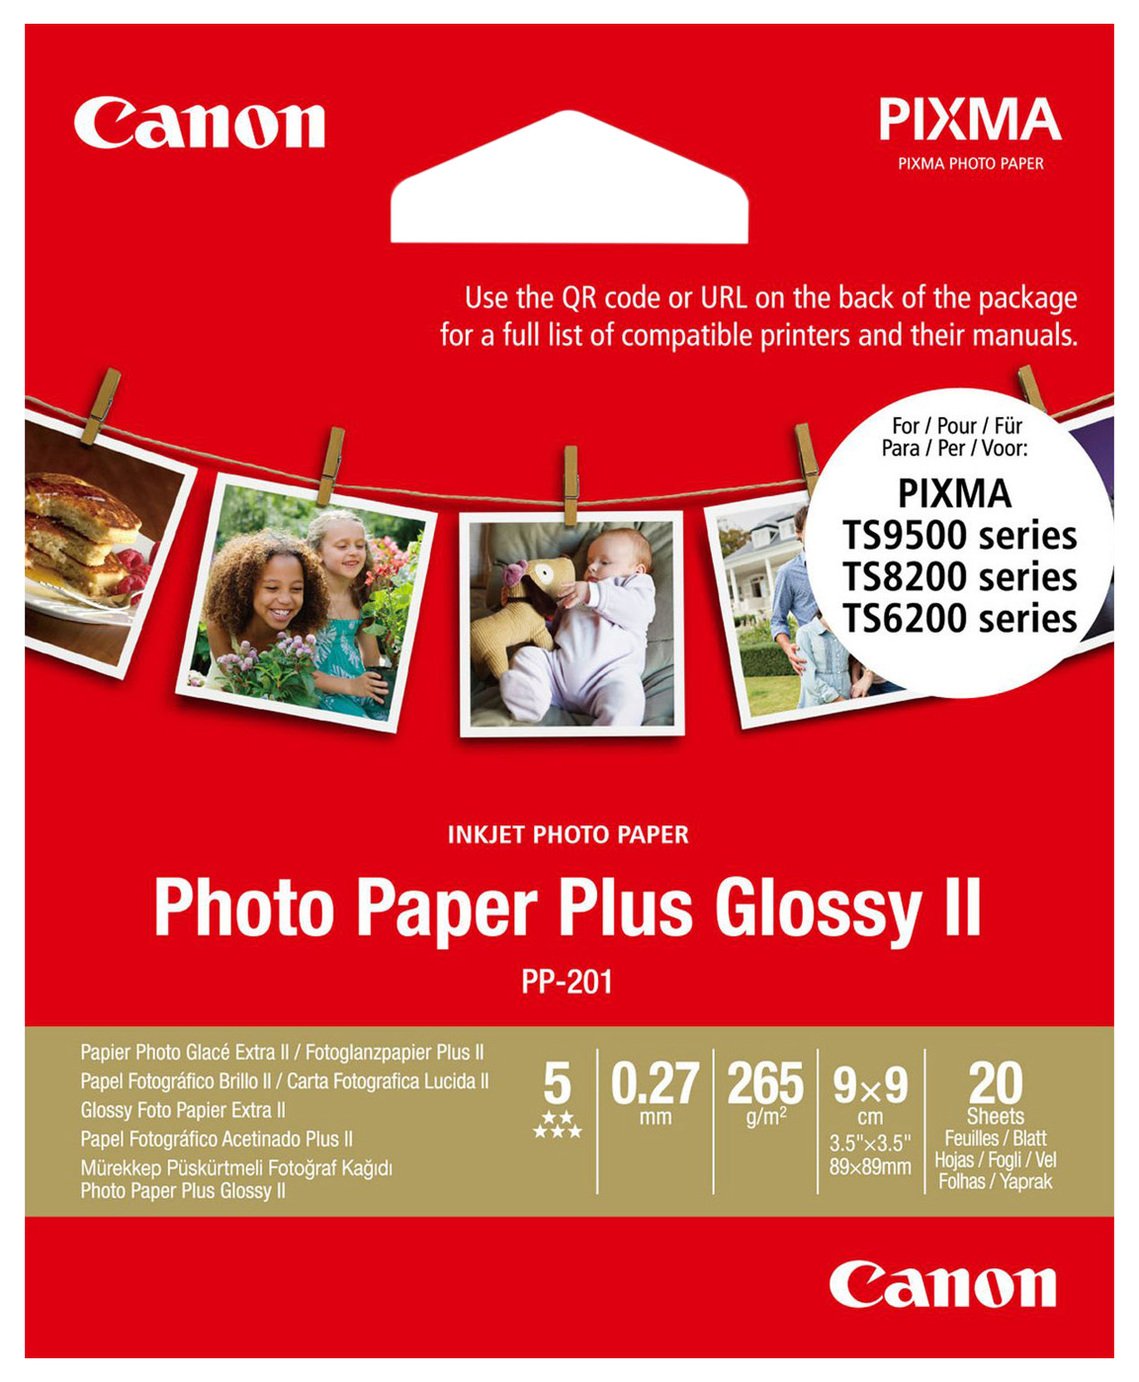 Canon 3.5 x 3.5in Photo Paper Pack Review